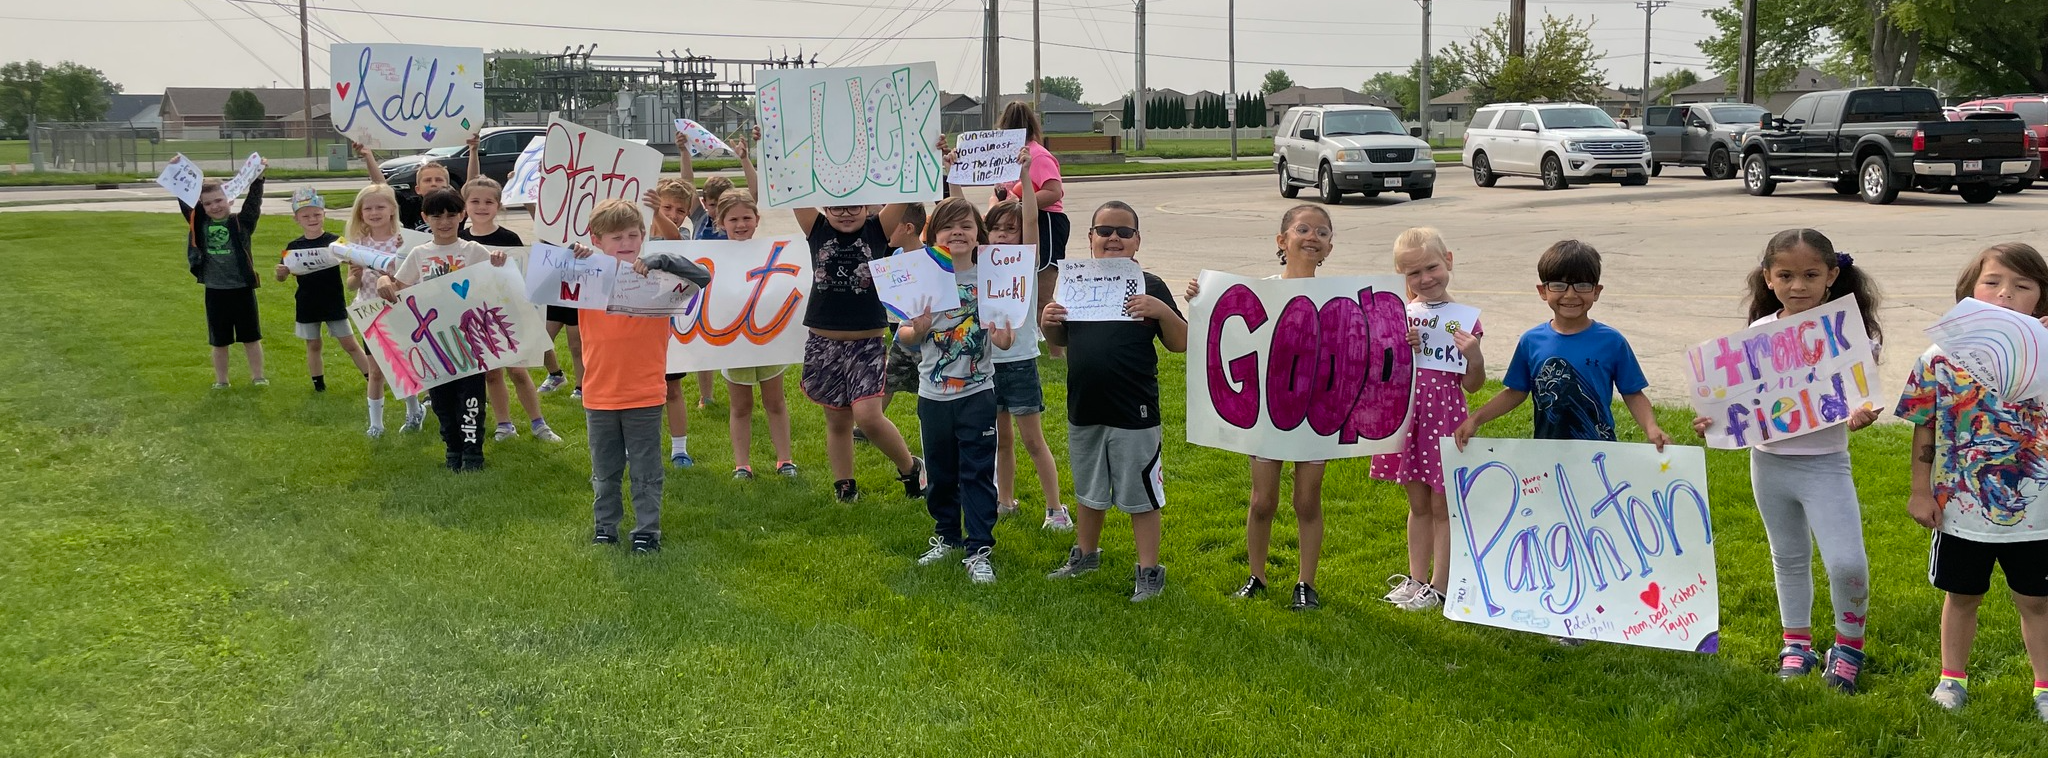 Lost Creek students hold signs and banners outside their school. The group is wishing the Columbus High School track members good luck at the state tournament.